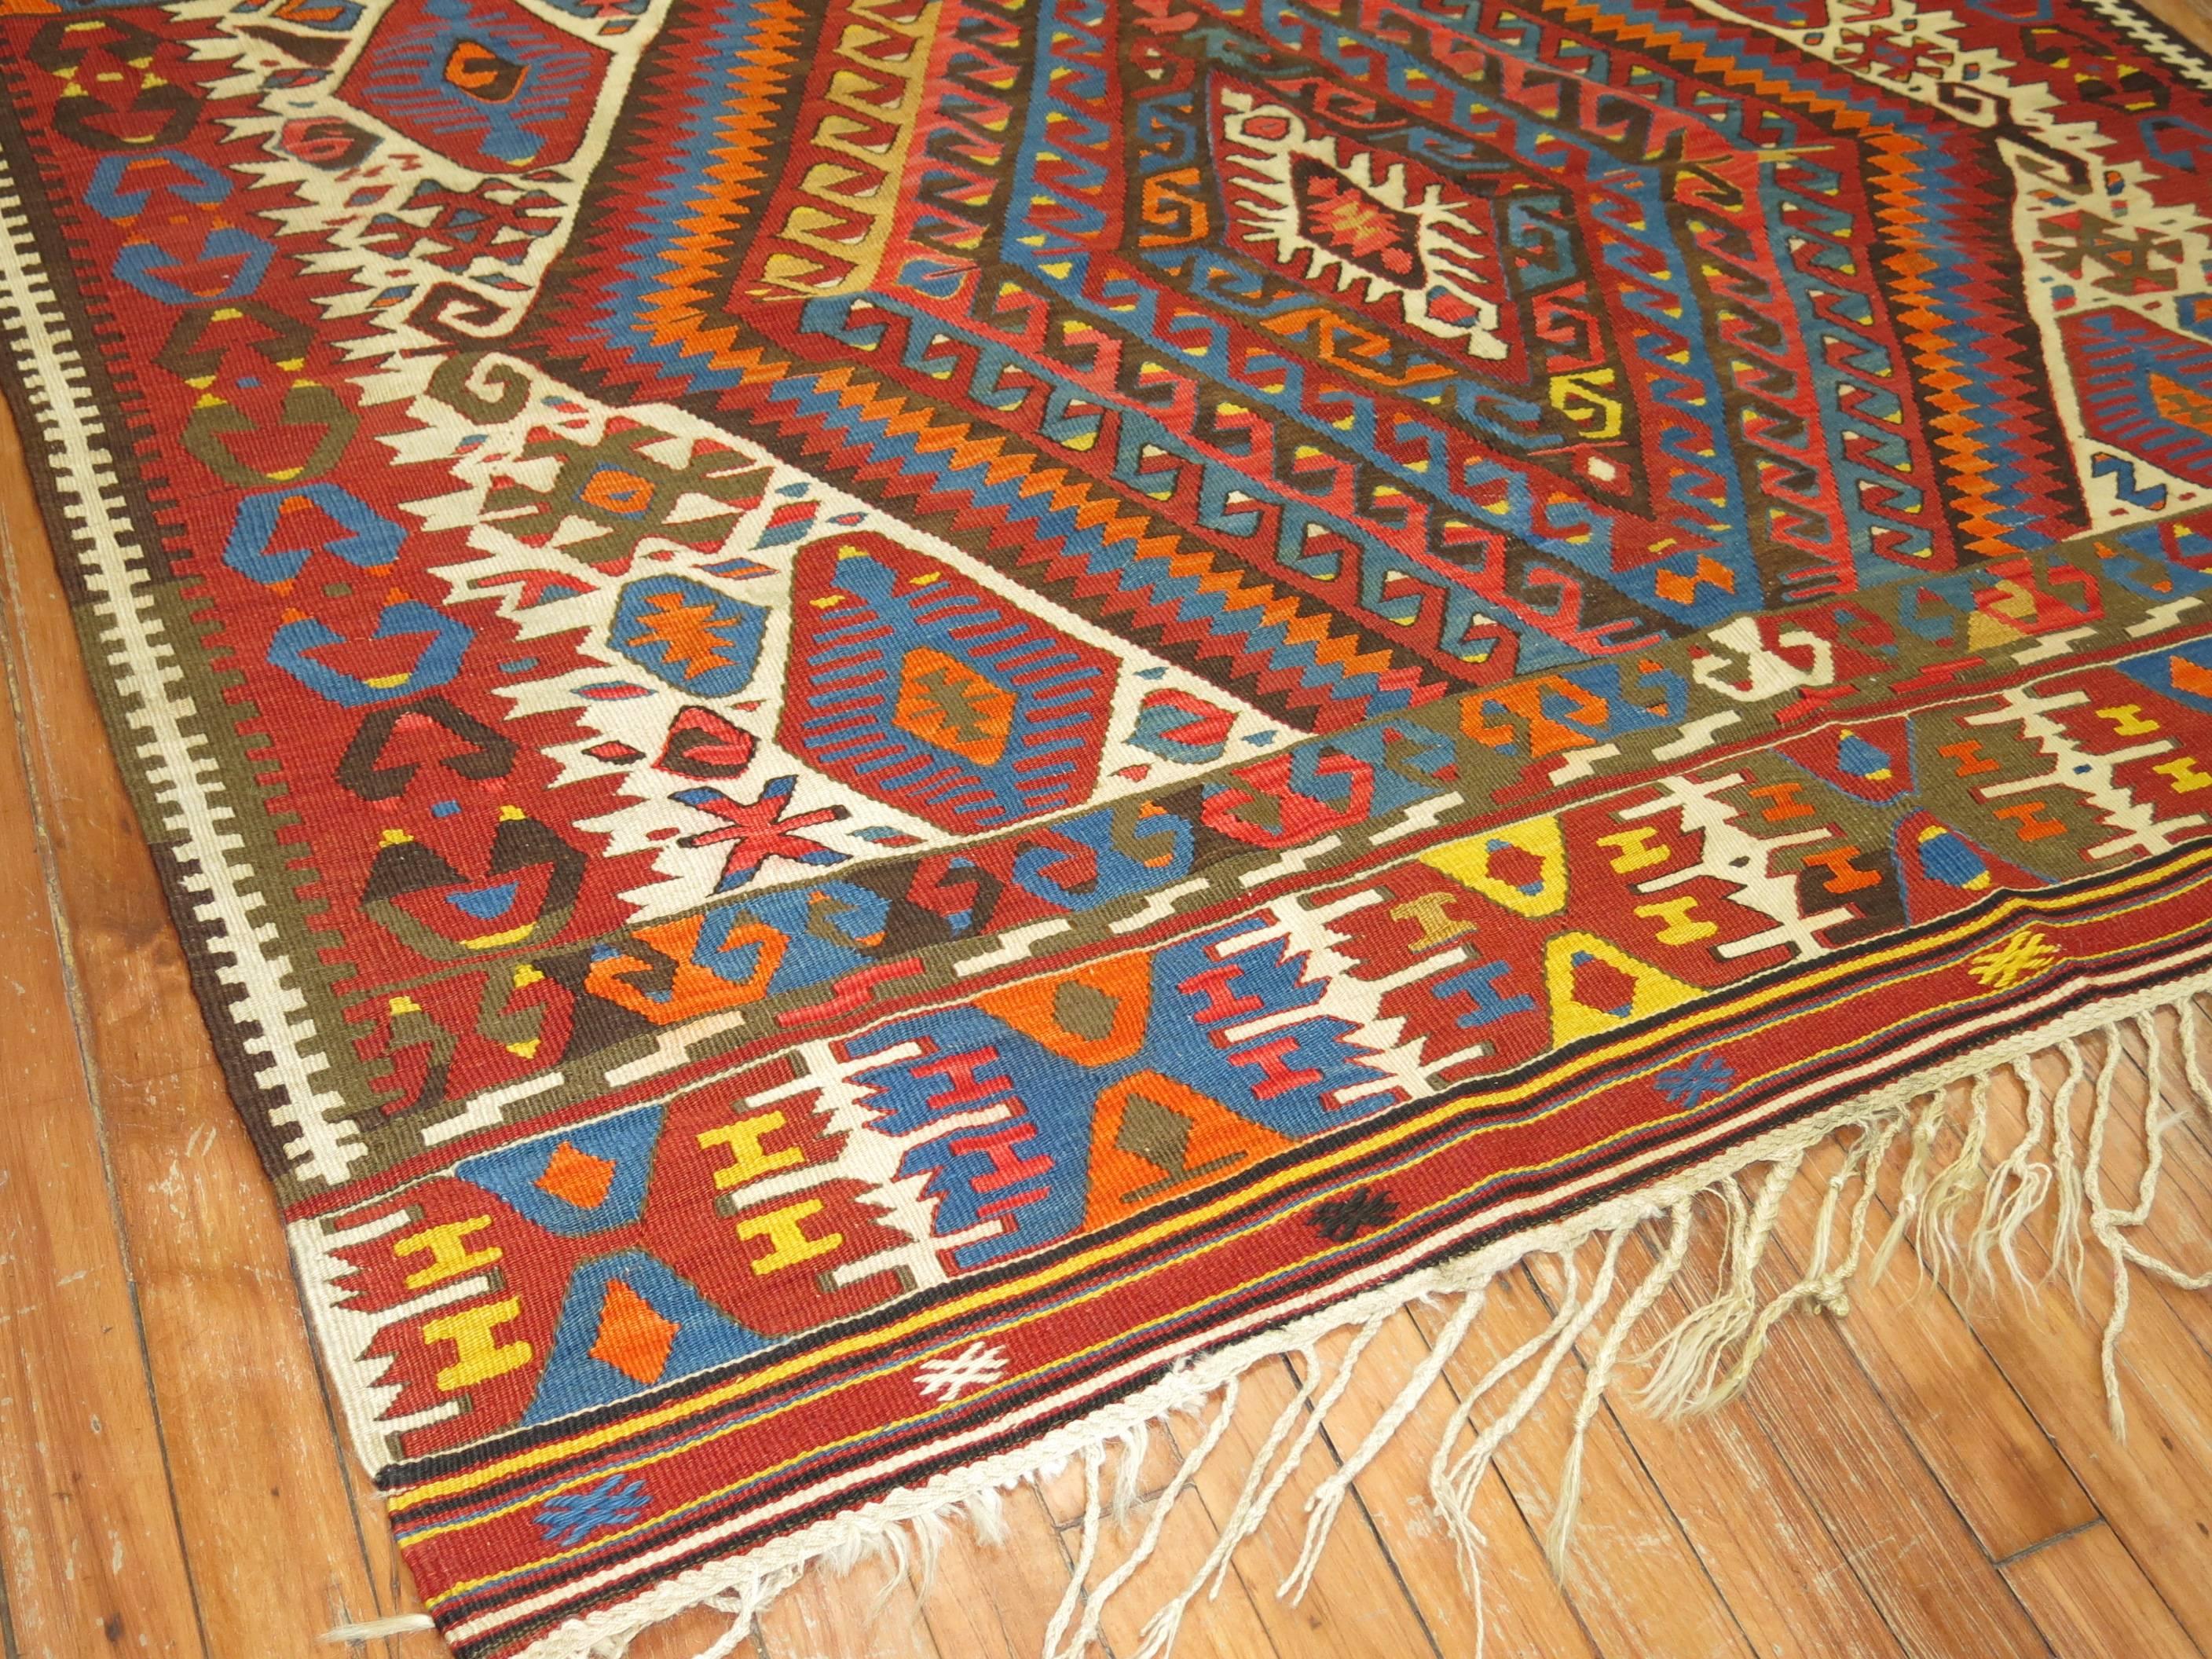 A fine example of an mid 20th century Turkish flat-weave Kilim rug.

4'4'' x 5'2''